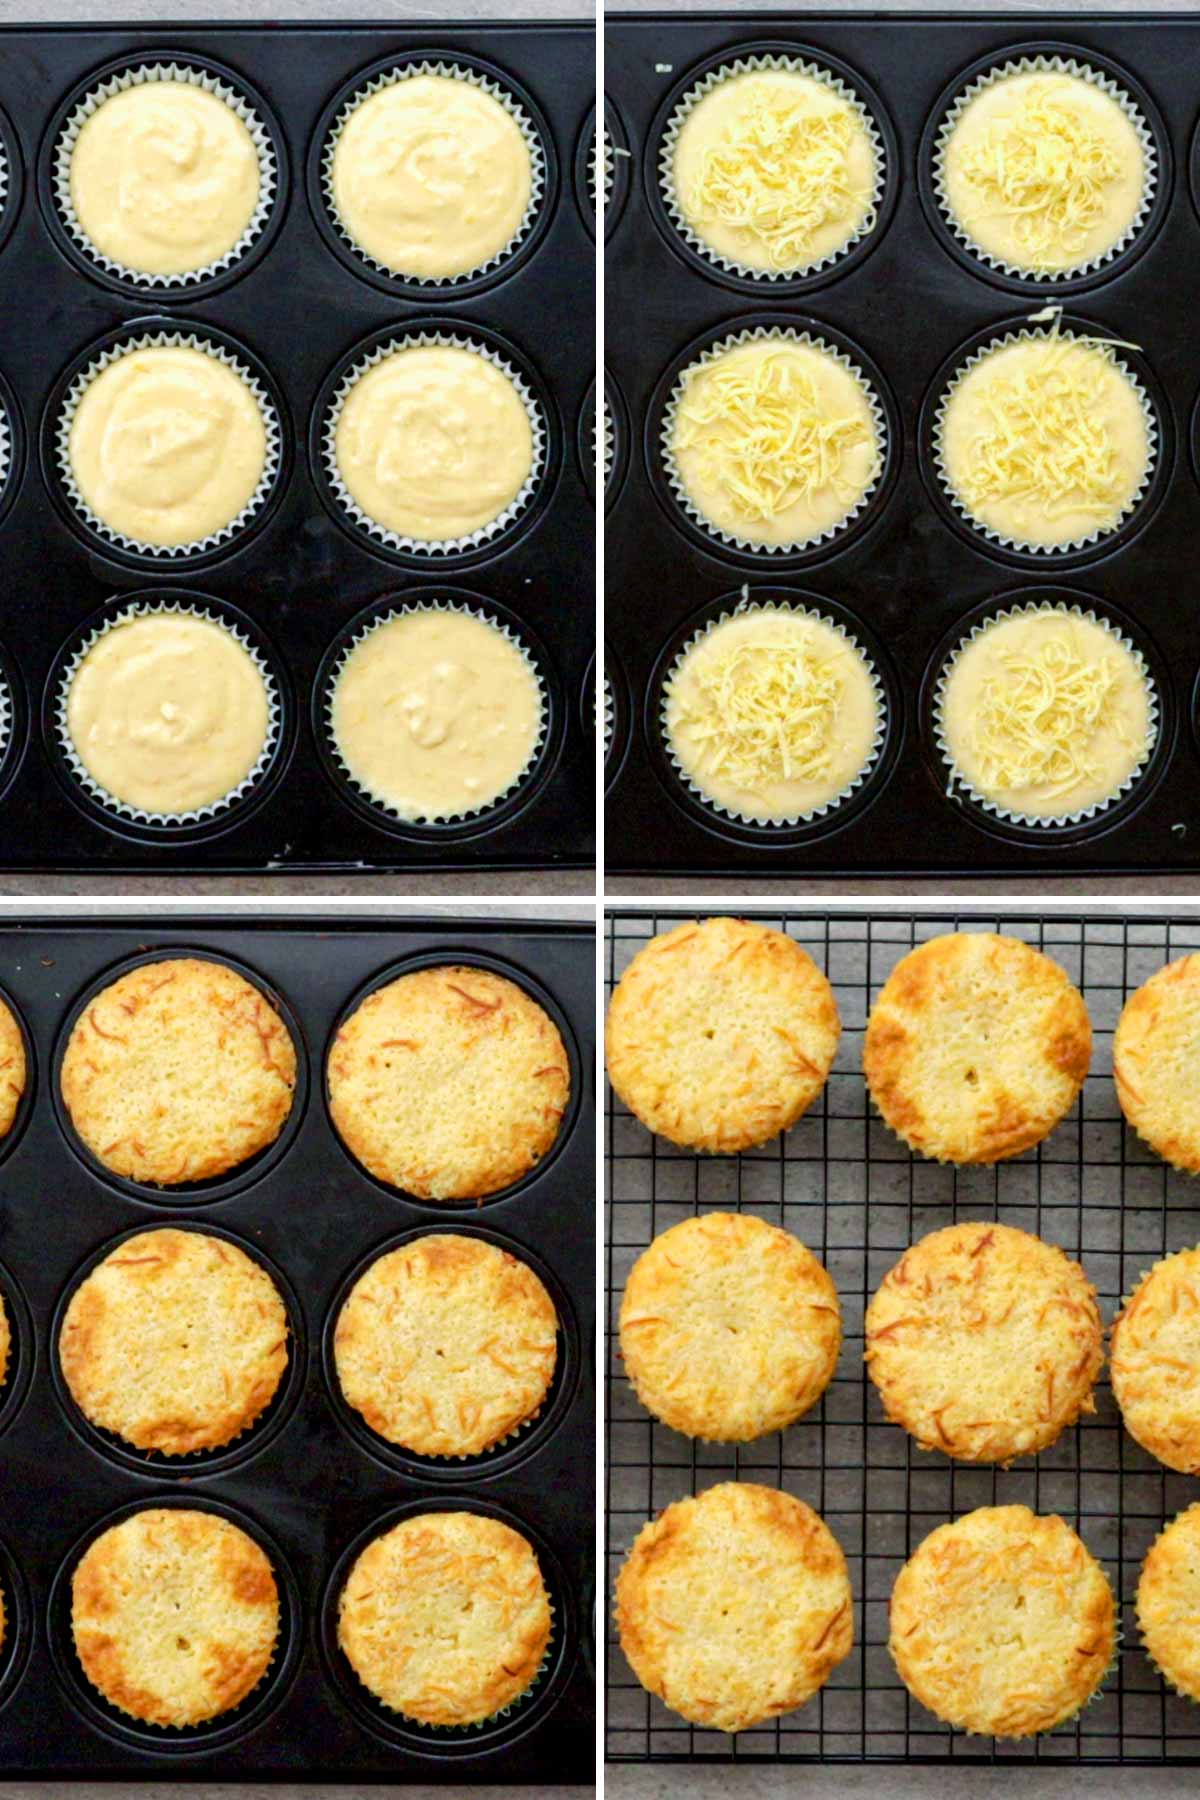 How to make Cheese Cupcakes.